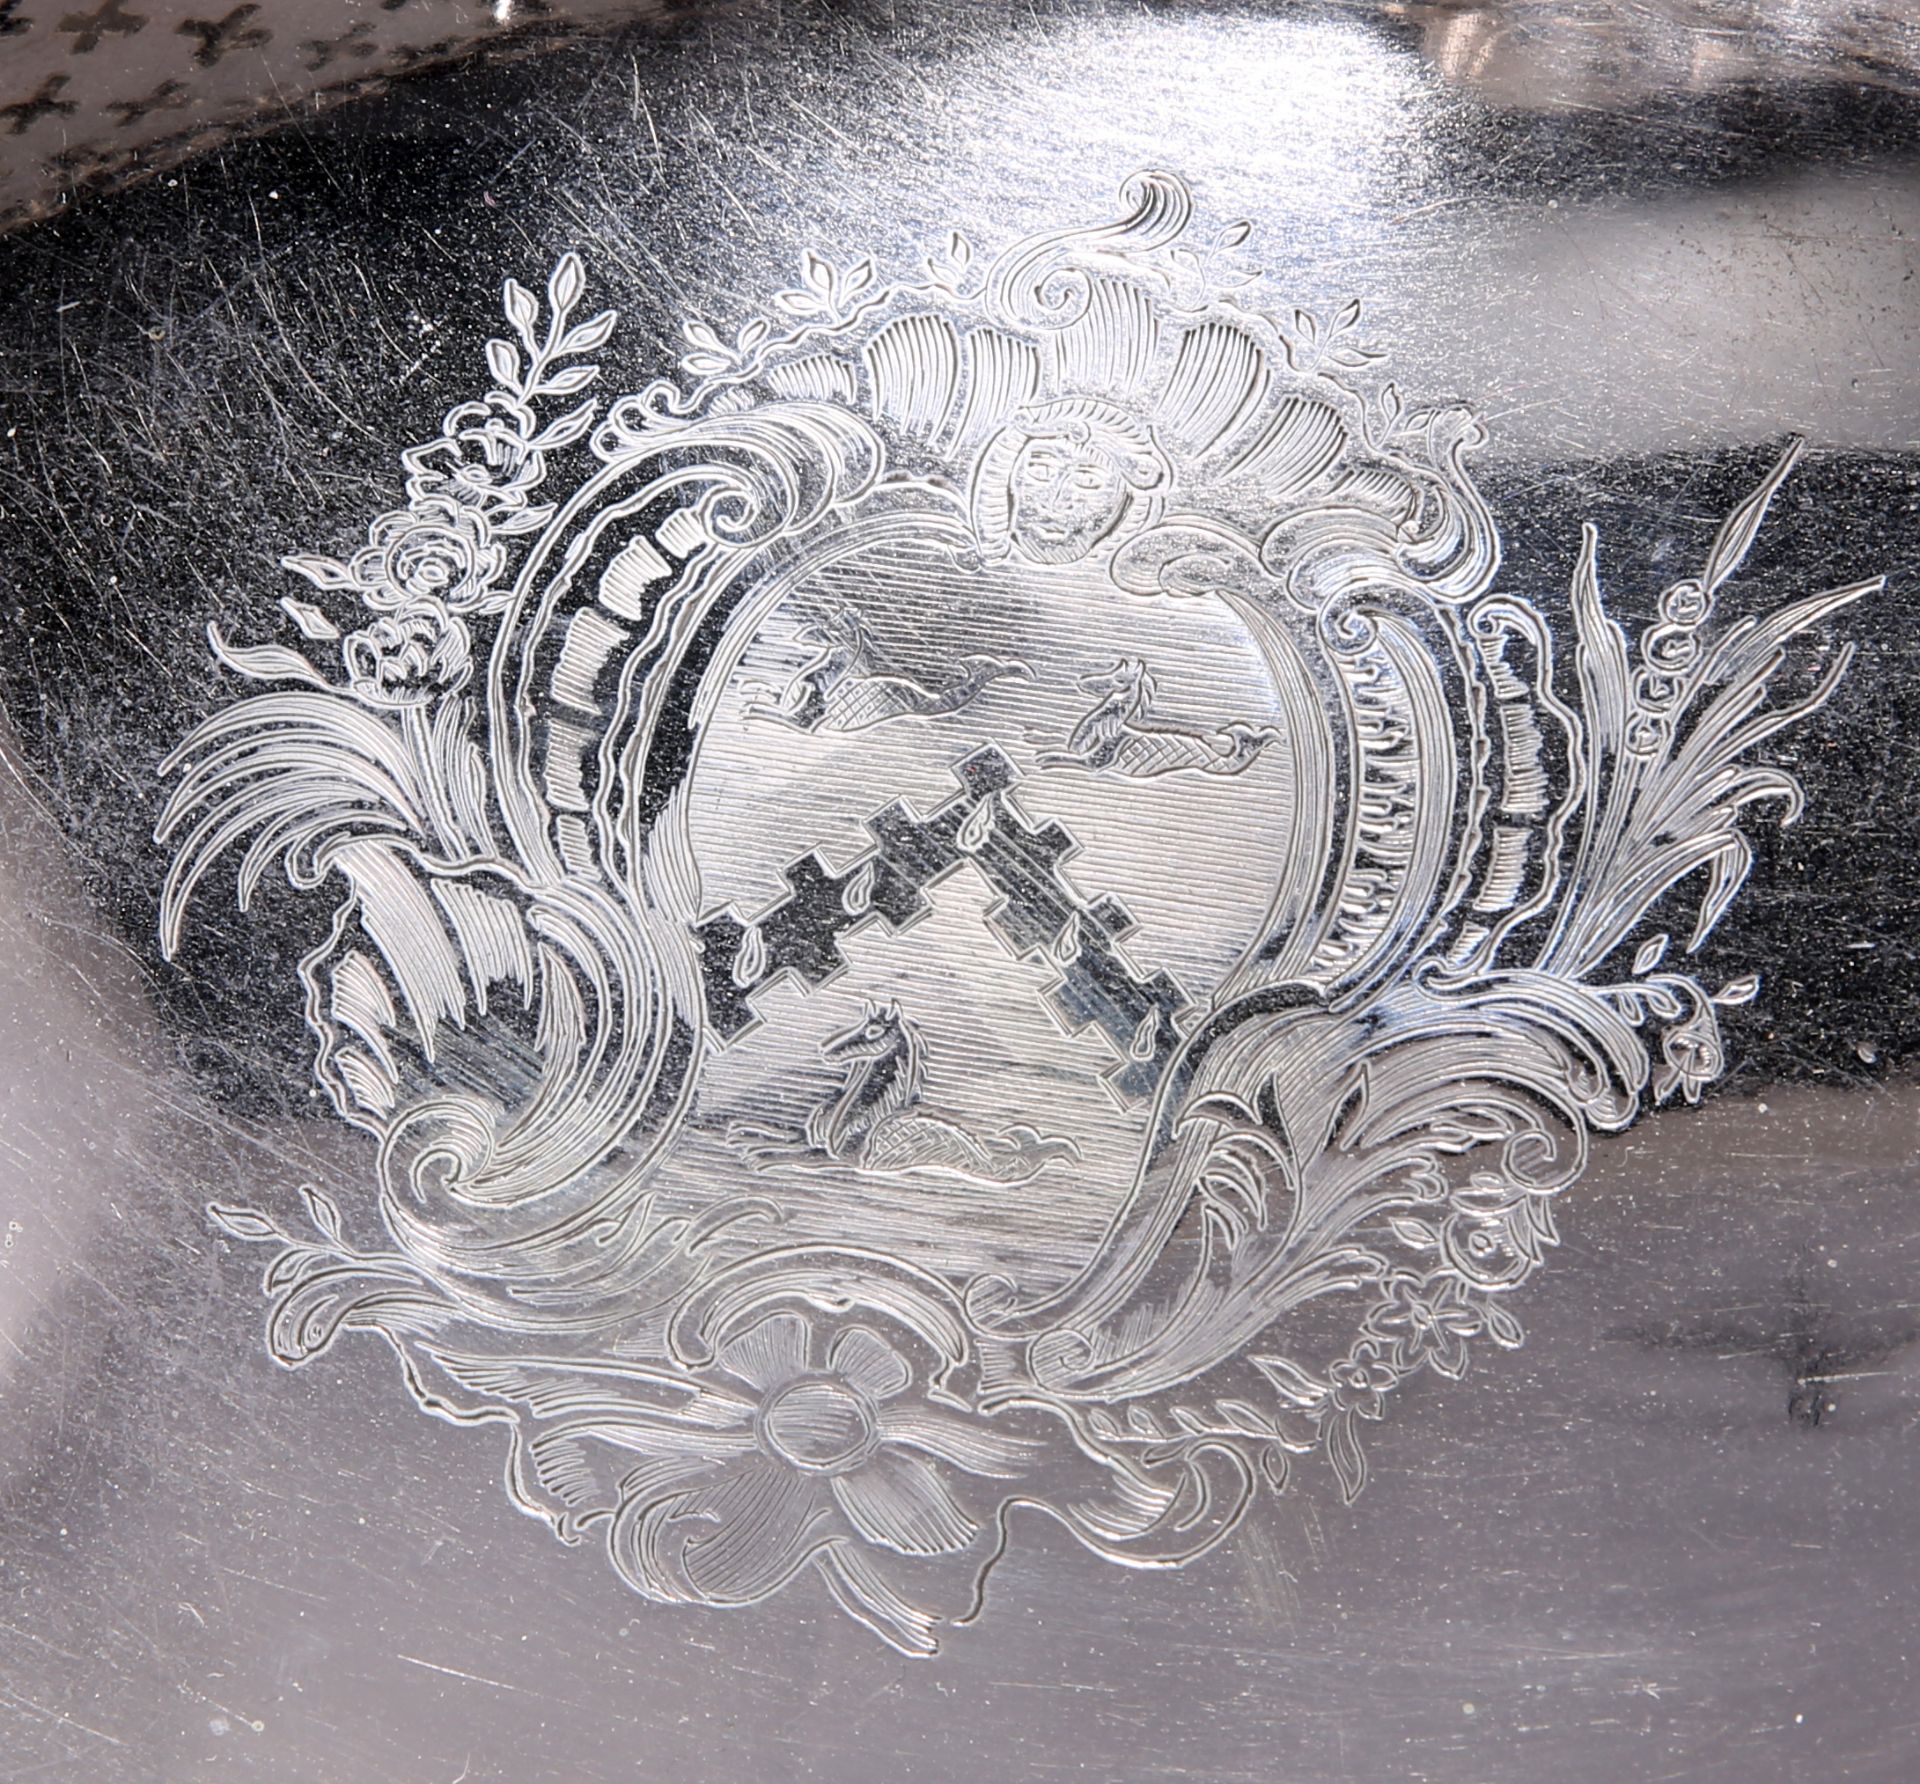 A FINE GEORGE II ROCOCO CAST SILVER SWING-HANDLED CAKE BASKET - Image 5 of 5